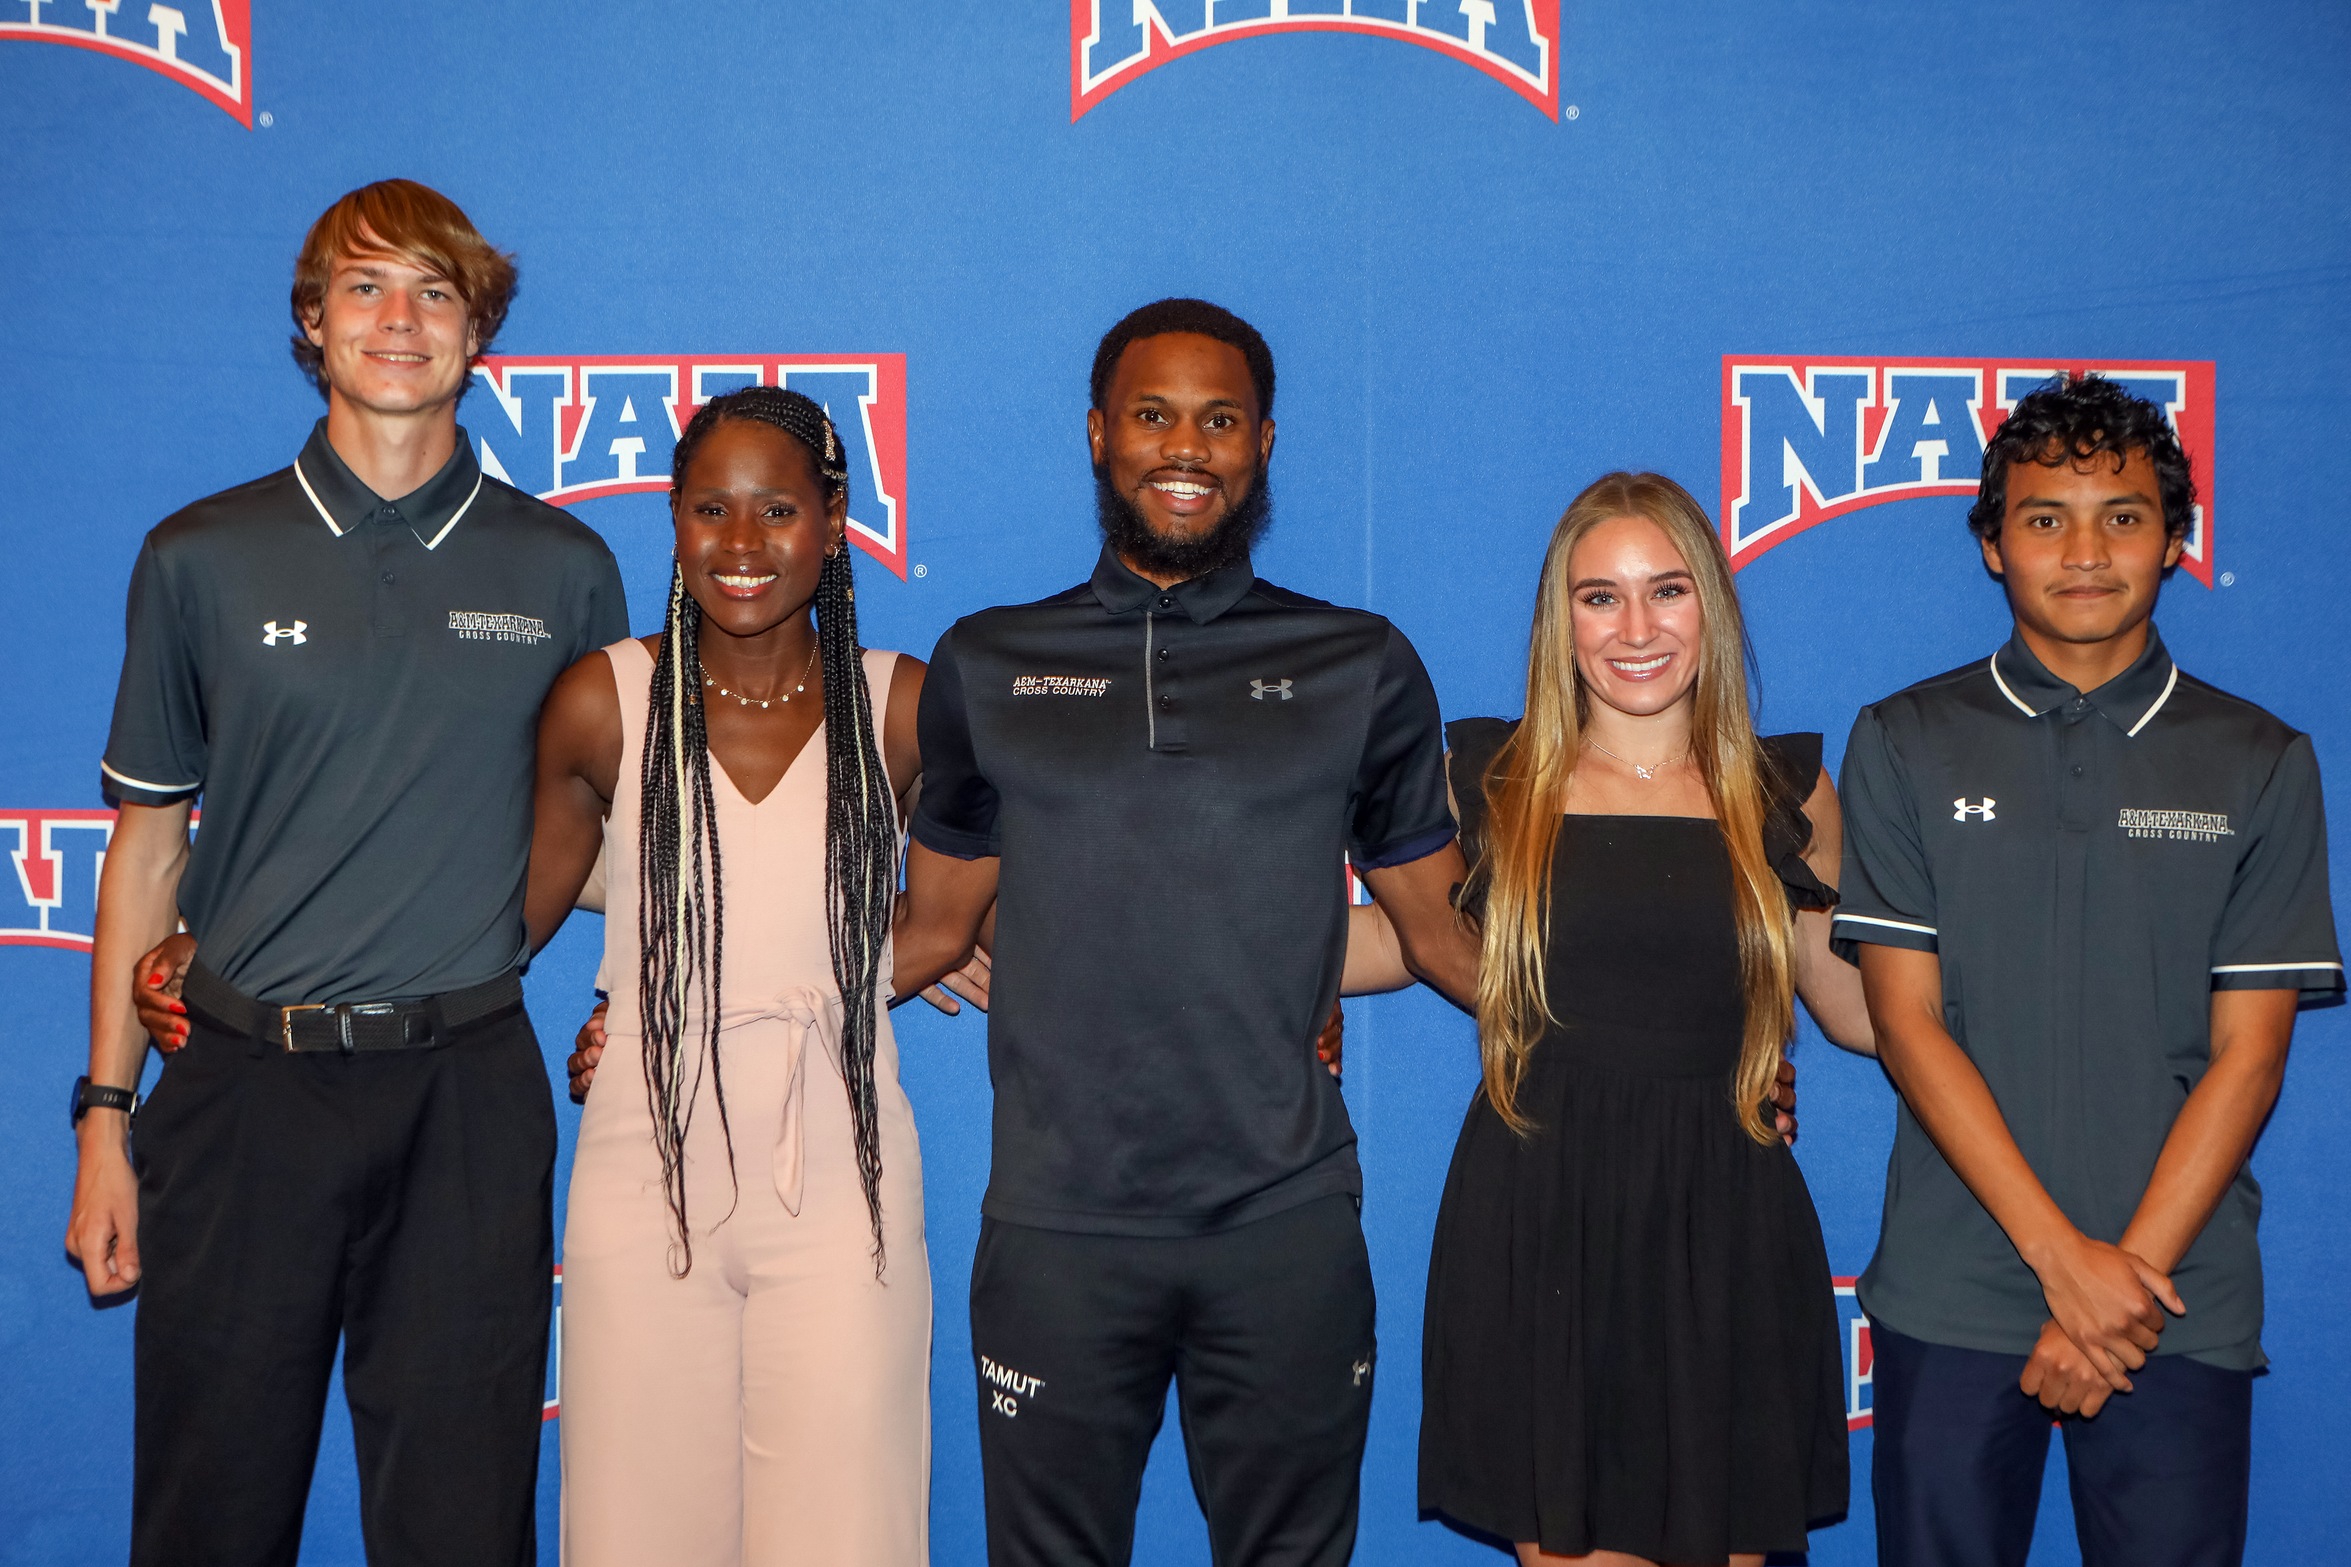 Eagles compete at NAIA Cross Country Nationals